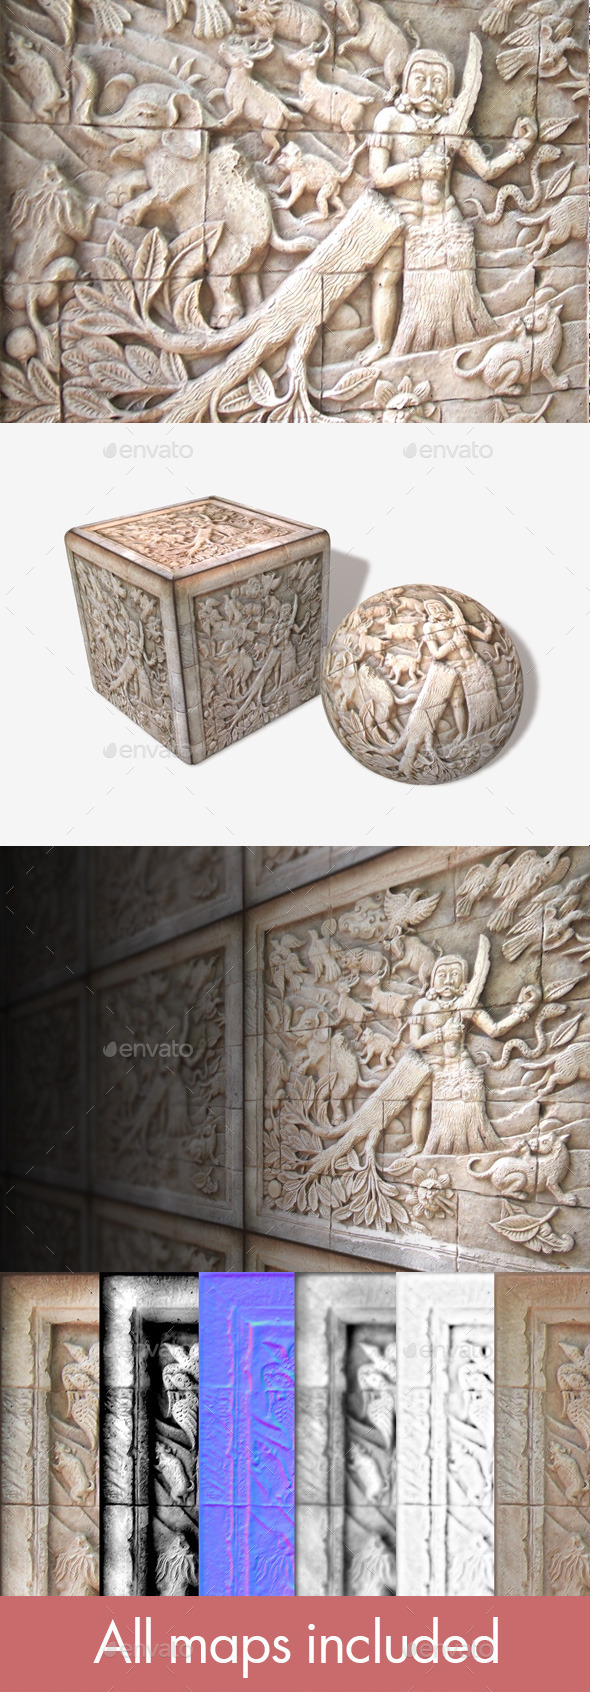 Asian Carved Stone - 3Docean 11123201